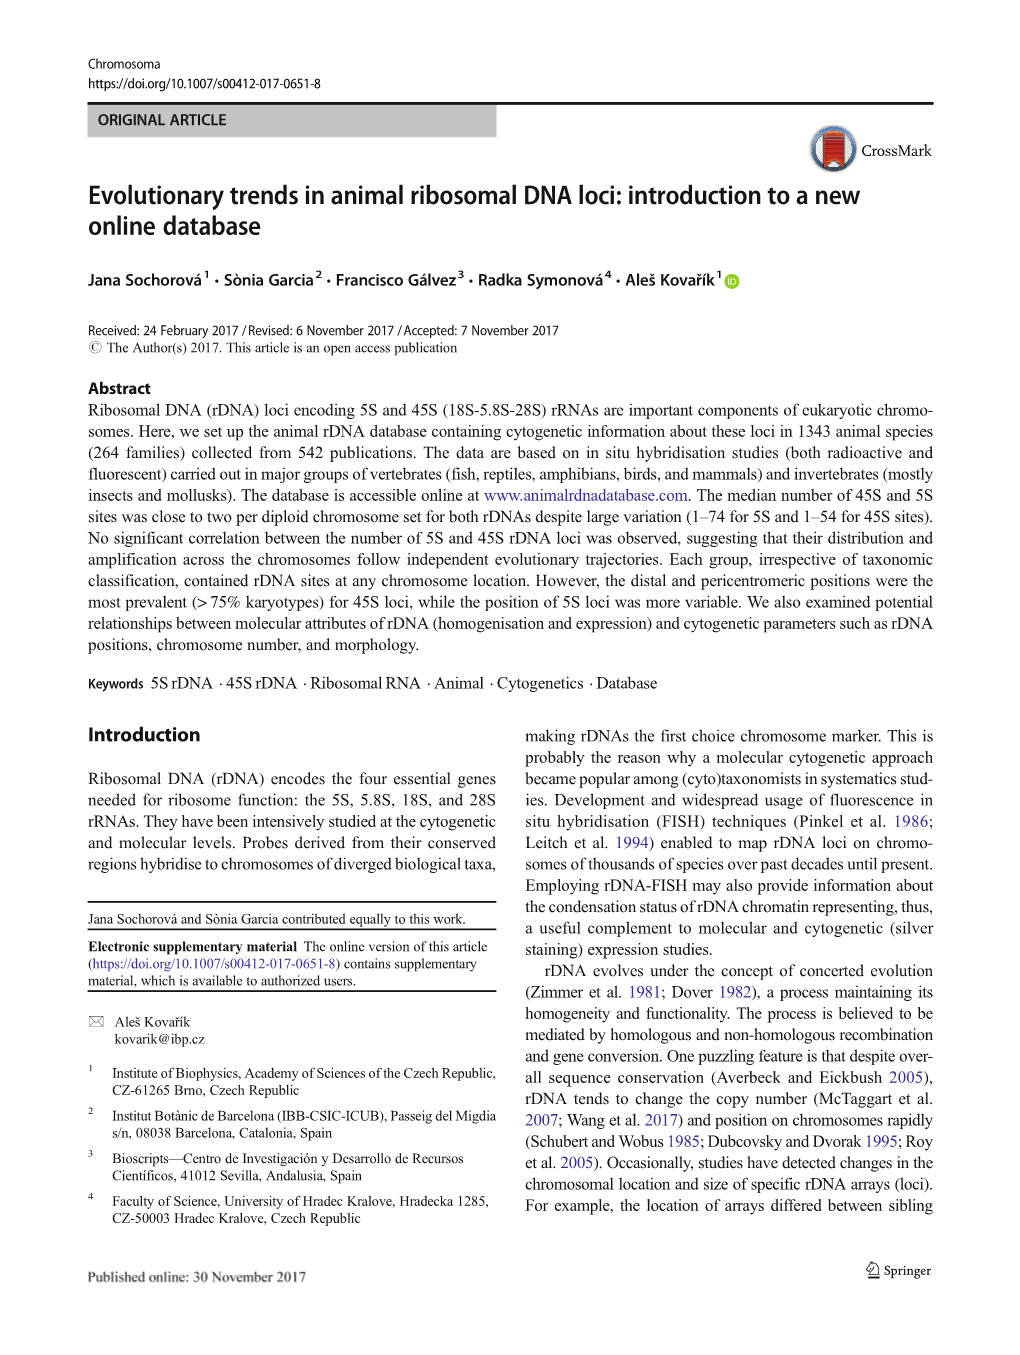 Evolutionary Trends in Animal Ribosomal DNA Loci: Introduction to a New Online Database